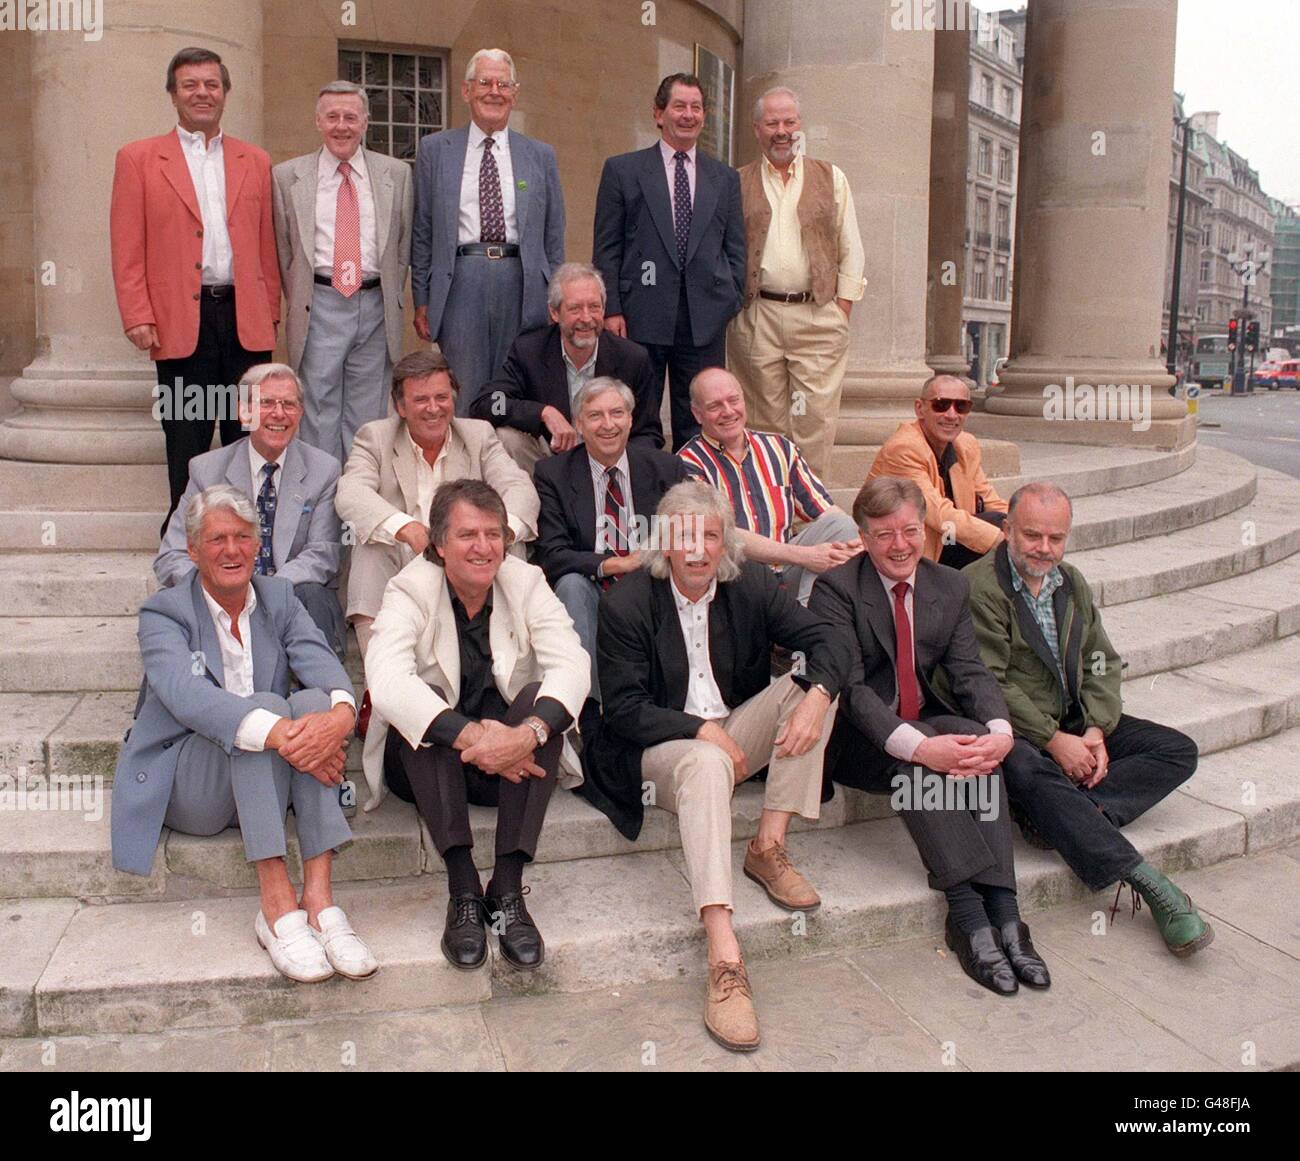 Fifteen of the original Radio 1 DJ's line-up on the steps of All Soul's Church, central London, in a recreation of the original publicity photograph taken 30 years ago that launched the new station. * (L-R) Back row: Tony Blackburn, Jimmy Young, Robin Scott (1st Controller), Duncan Johnson (squatting), Dave Cash and Pete Brady; Middle Row: Bob Holness, Terry Wogan, Keith Skues, Chris Denning and Pete Myers; Front row: Pete Murray, Ed Stewart, Pete Drummond, Mike Ahern and John Peel. Those missing from the original picture are Barry Aldiss, Kenny Everett and Mike Raven, all deceased; Mike Stock Photo